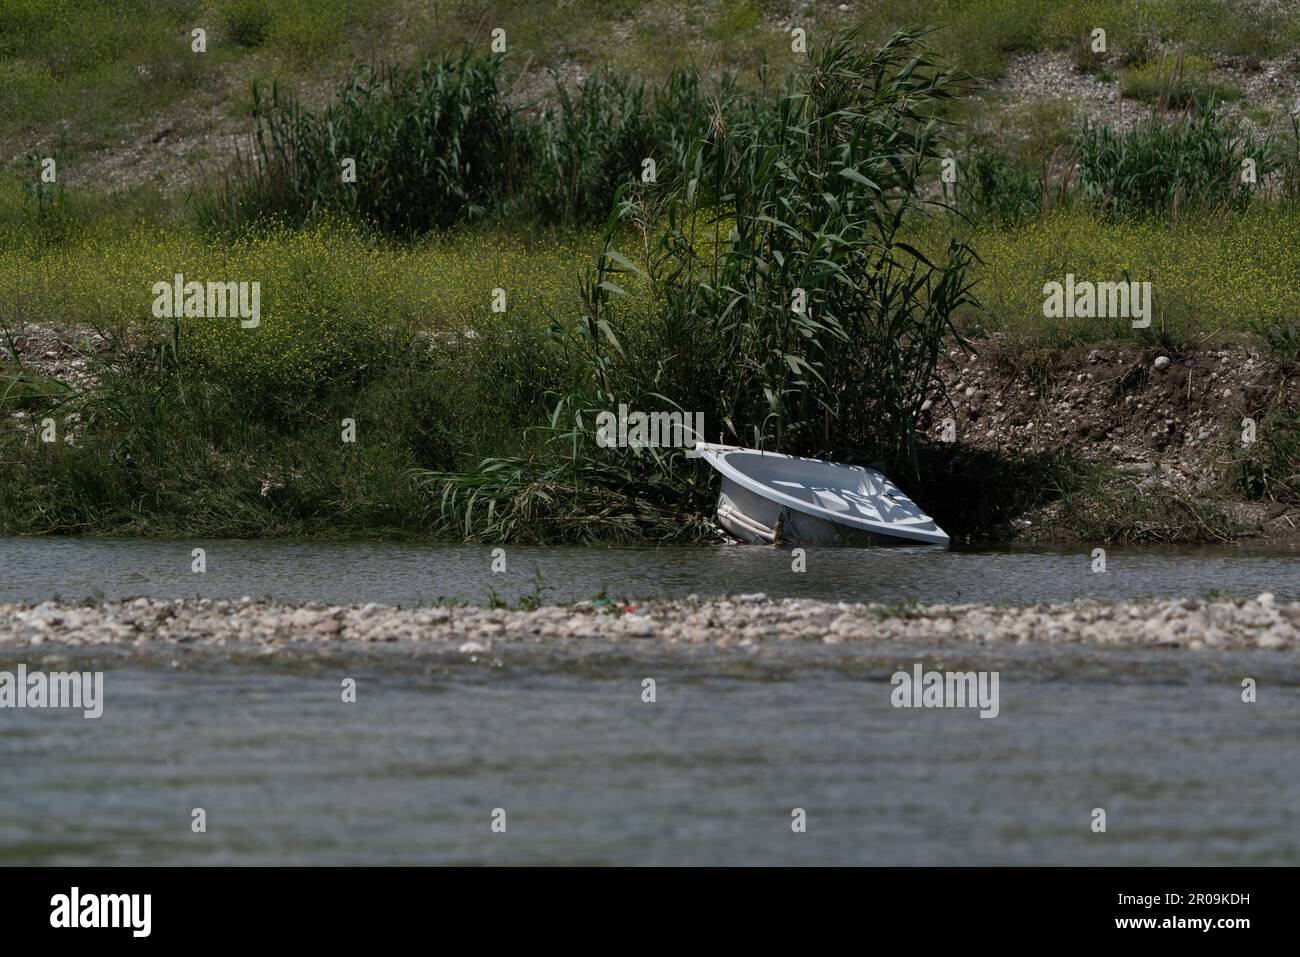 A bath tub dumped by the river. Destruction of the environment. Stock Photo